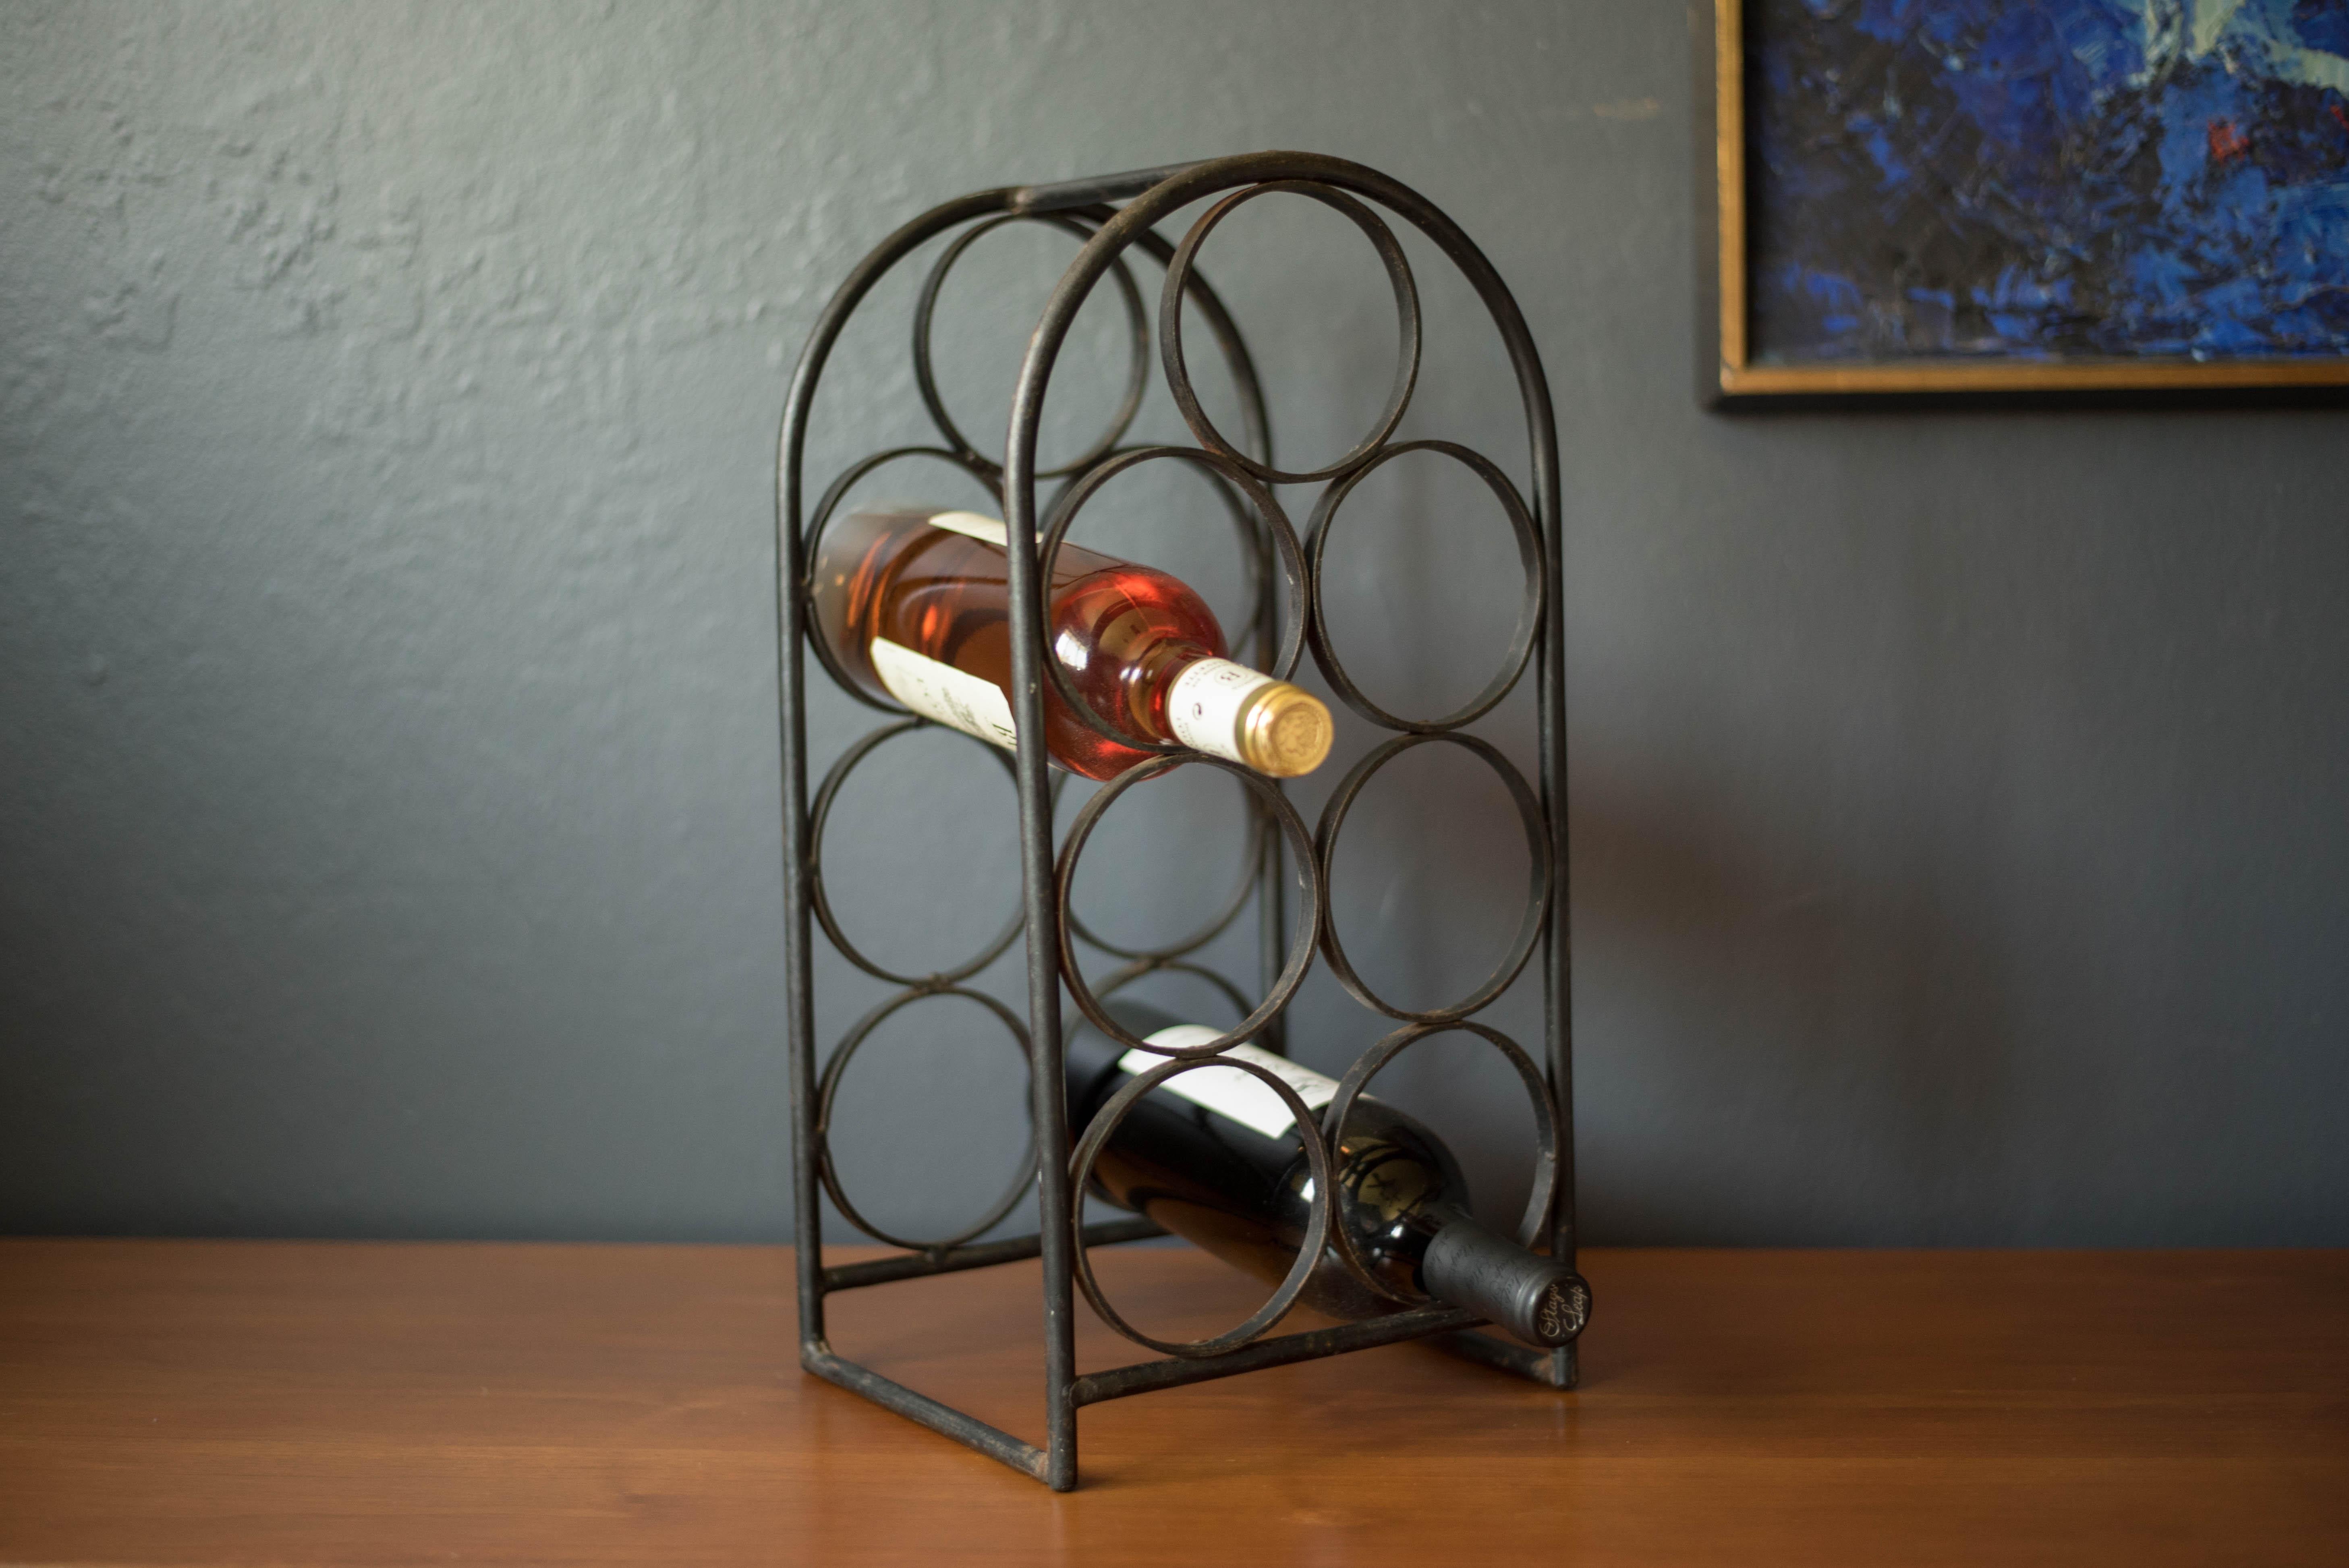 Vintage wrought iron wine rack designed by Arthur Umanoff for Shaver Howard. This piece accommodates up to seven bottles and offers additional storage display for the kitchen countertop or bar table.